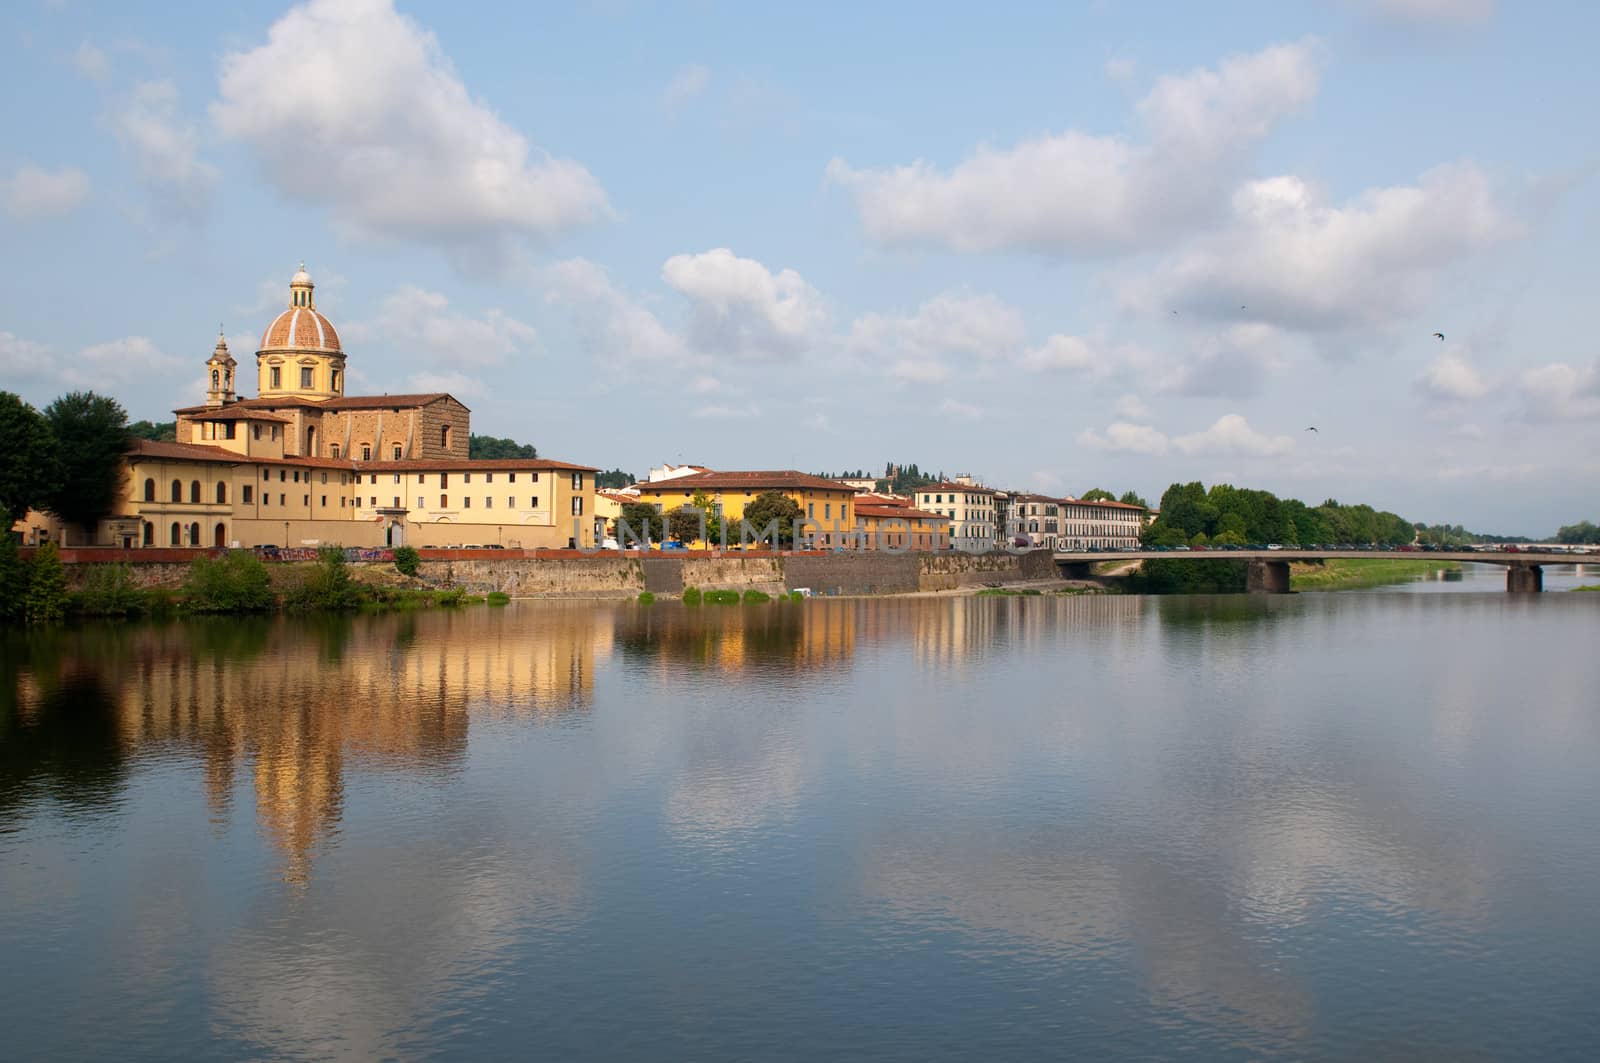 River Arno and church San Frediano in Cestello in Florence, Tuscany, Italy. by lexan